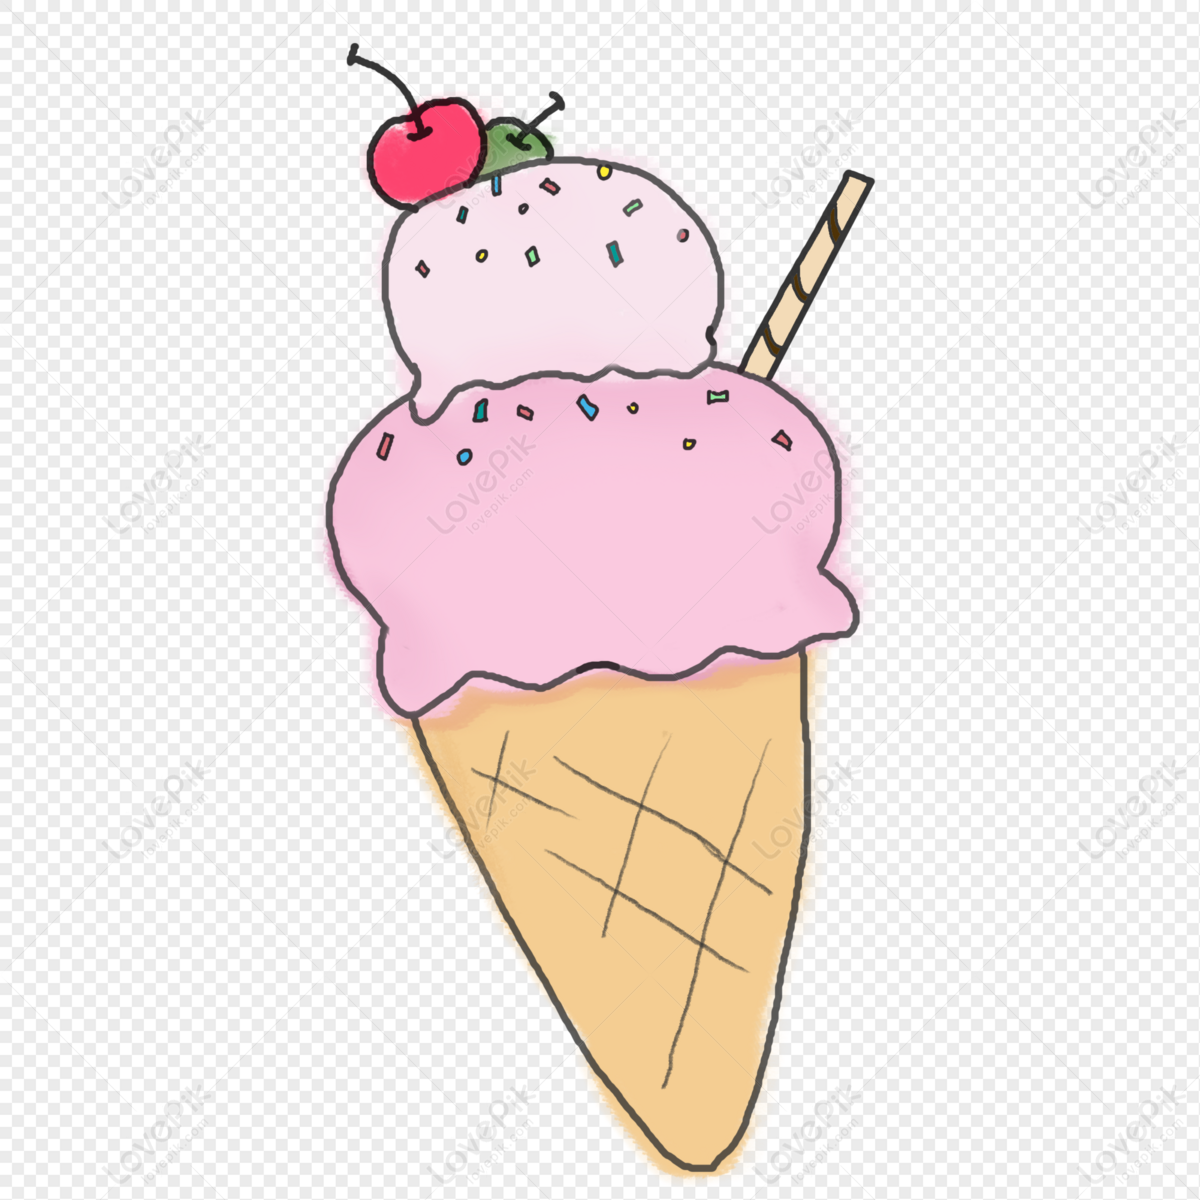 Easy How to Draw an Ice Cream Cone Tutorial Video